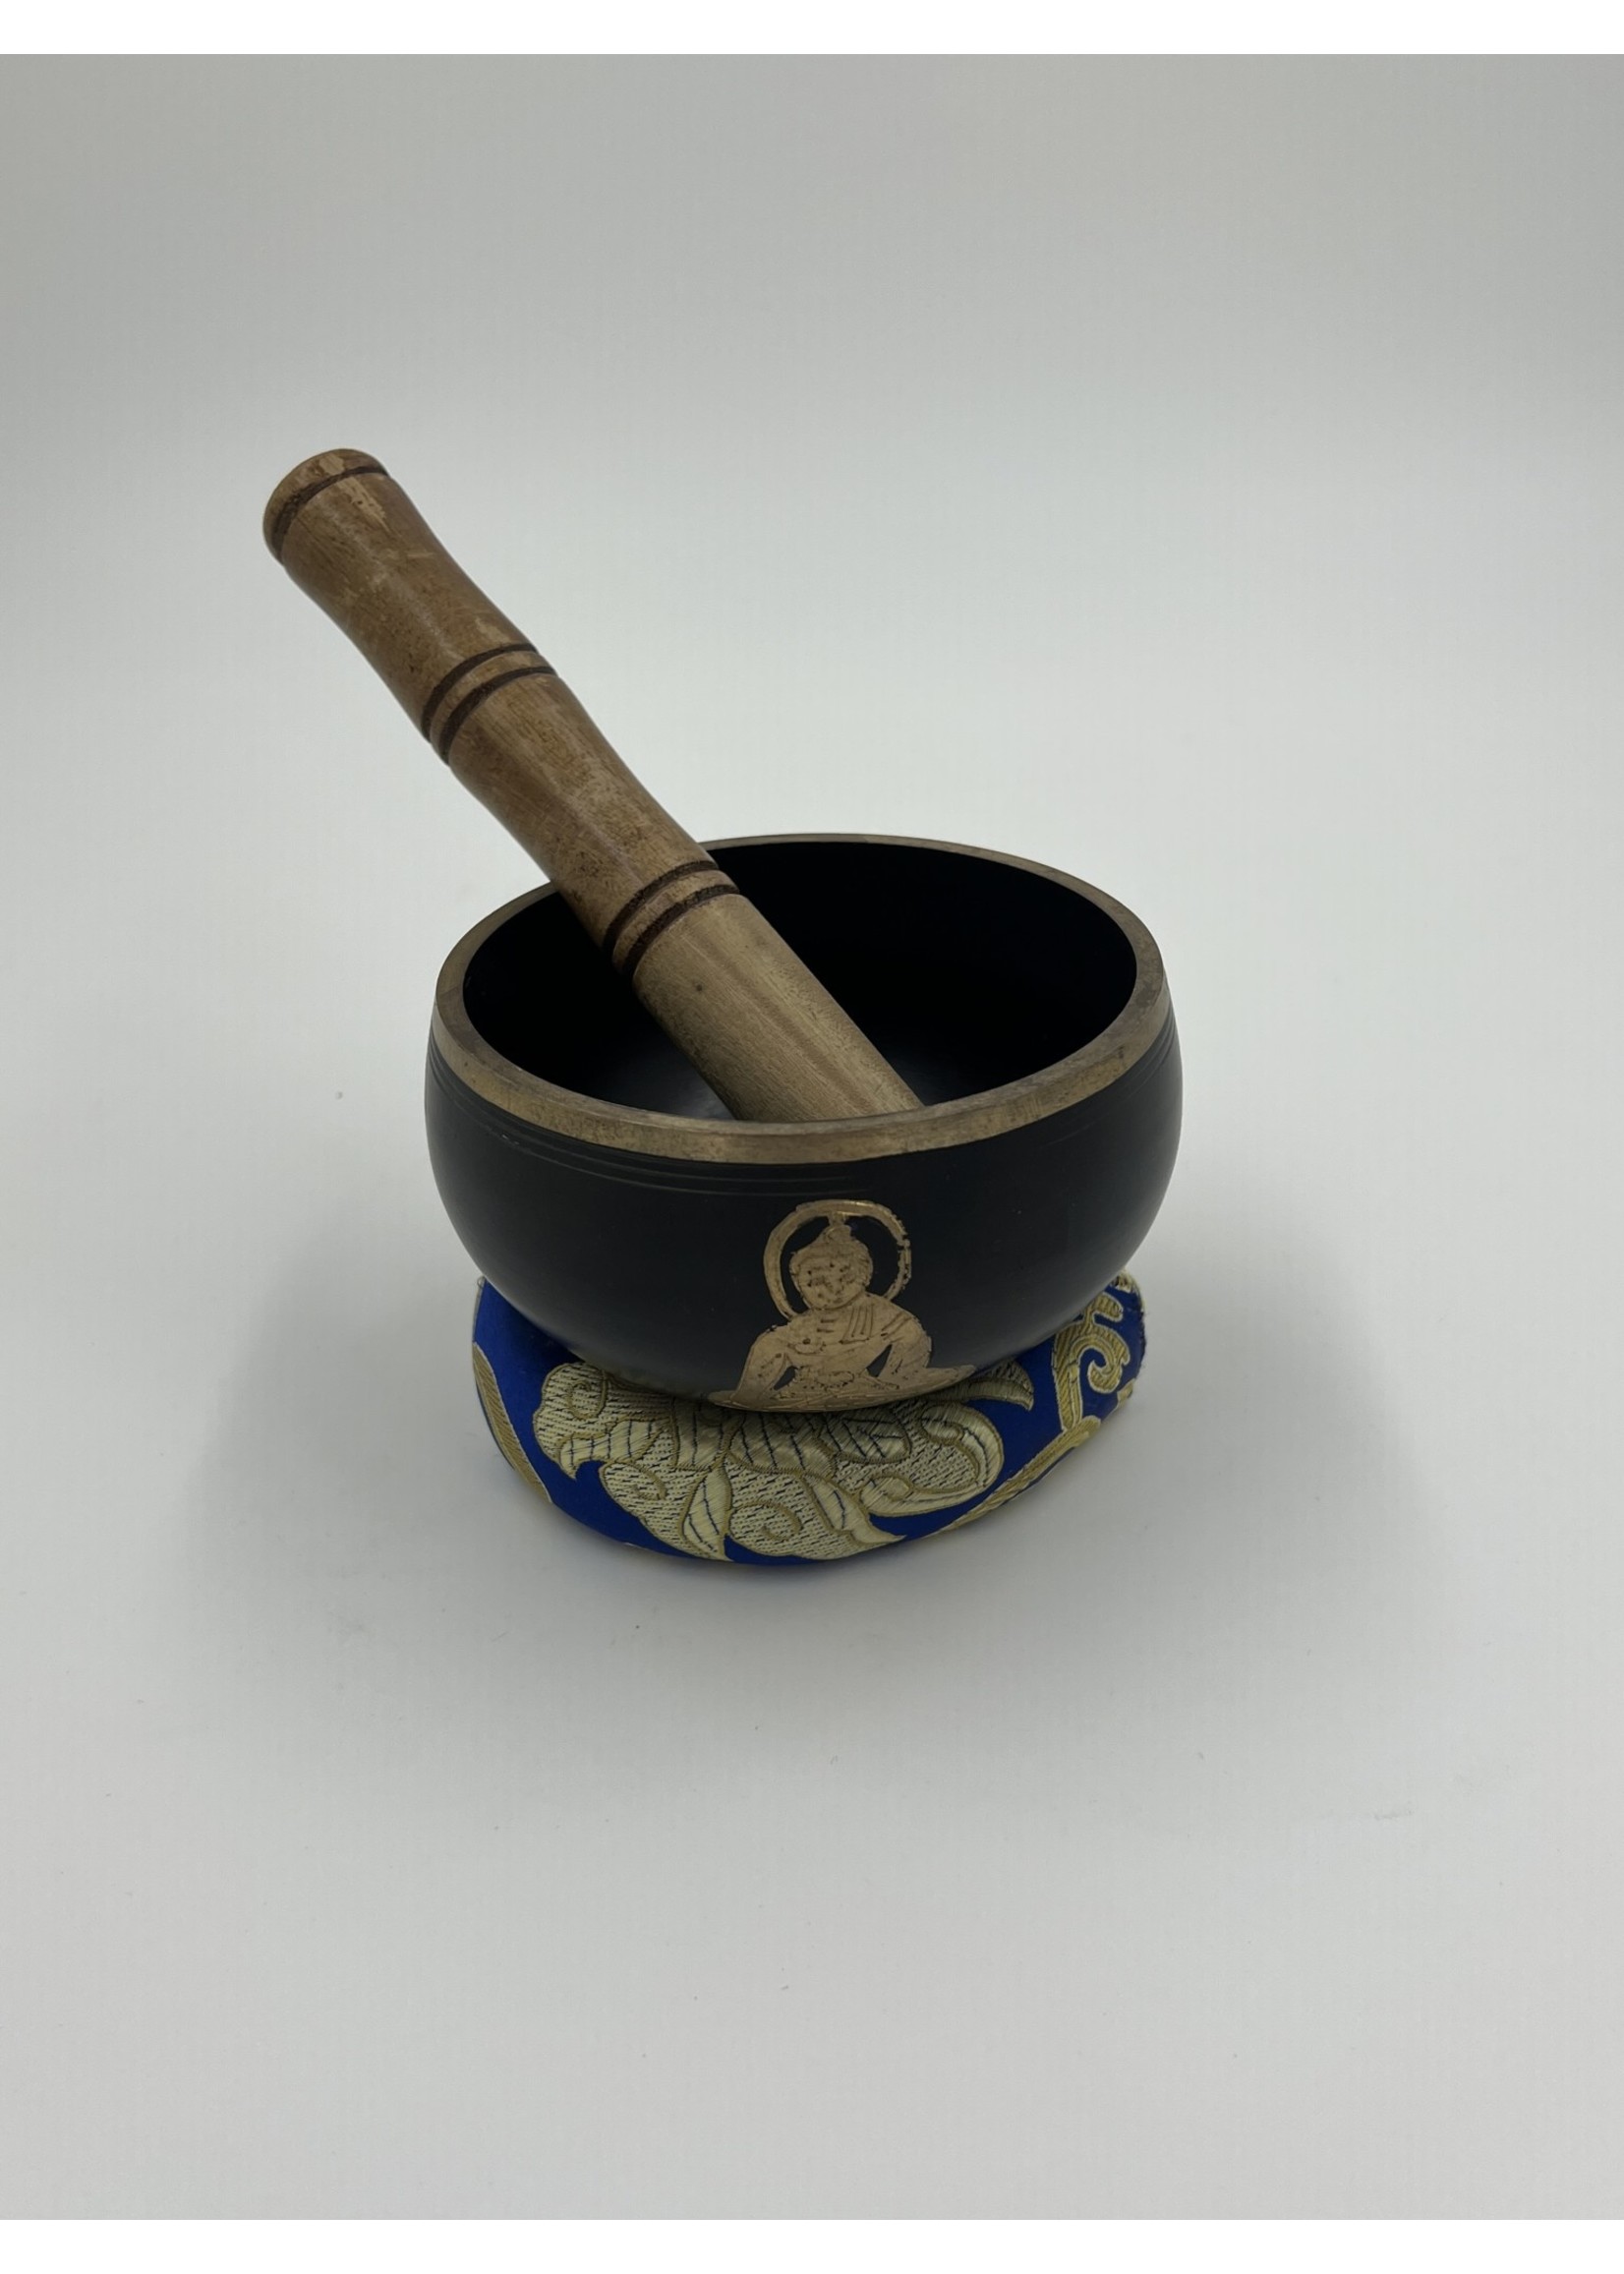 Other Things Himalayan Singing Bowl with Buddha Figure Design